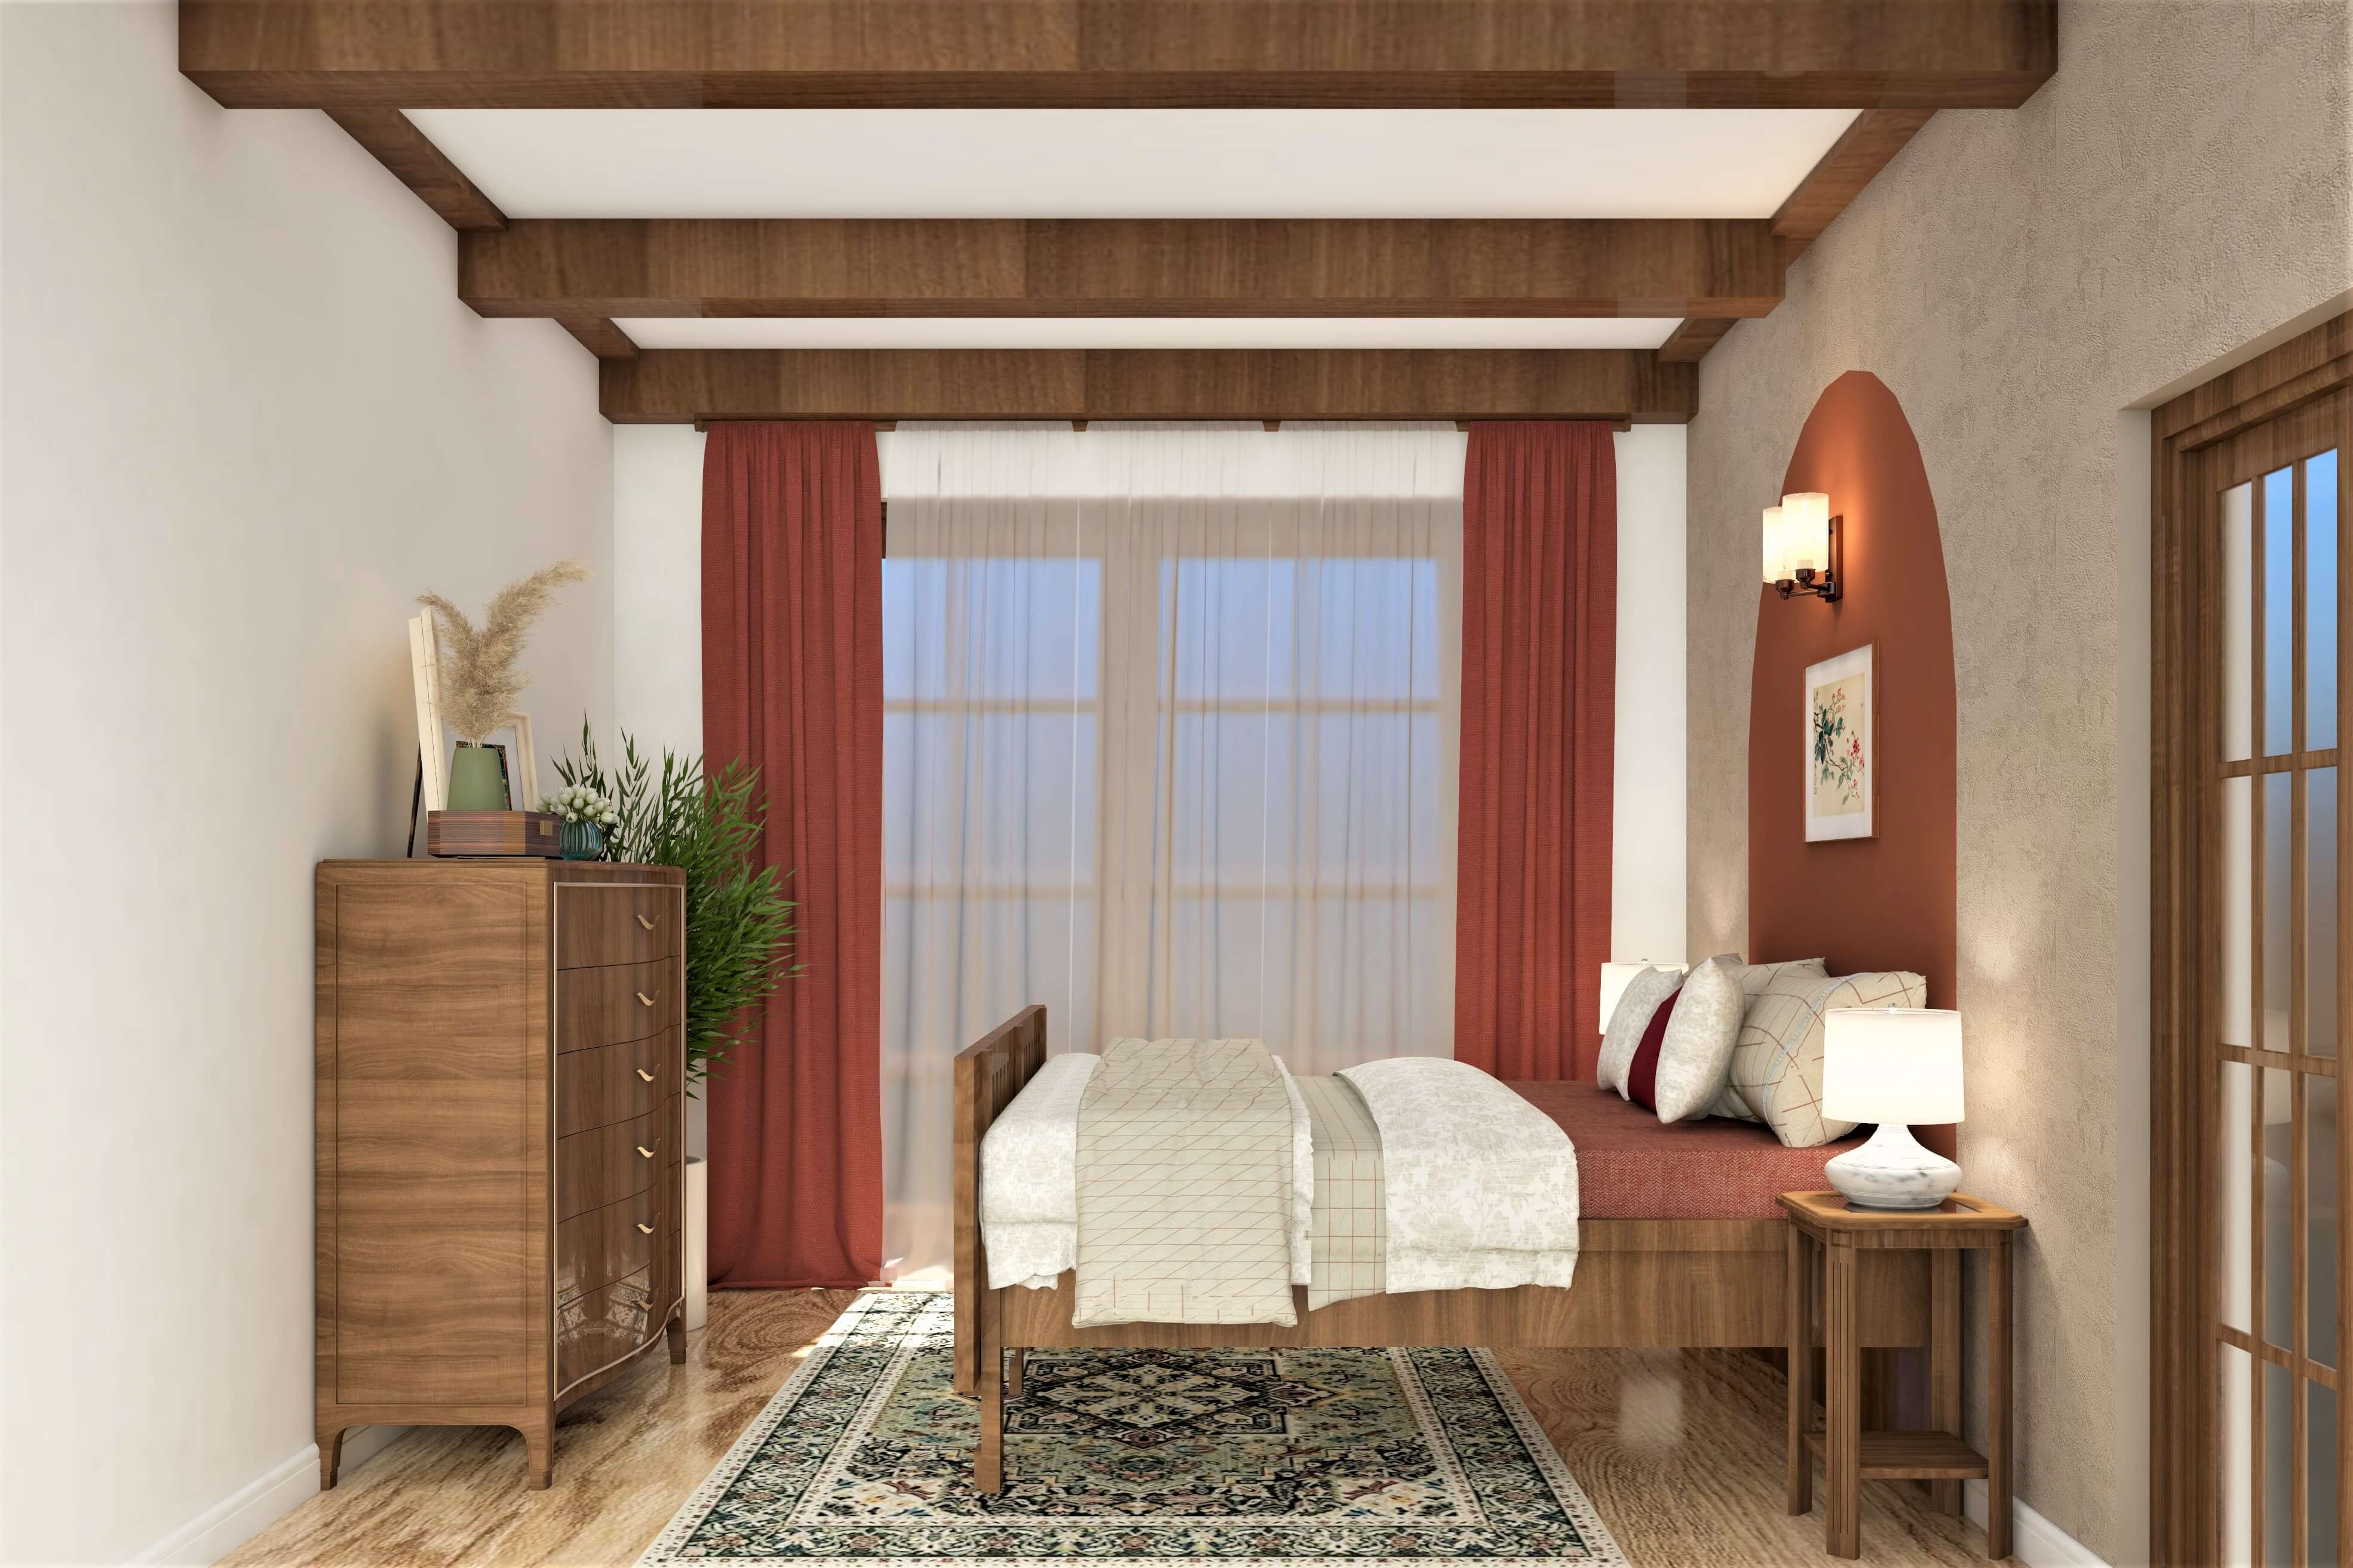 Warm and breezy guest bedroom design - Beautiful Homes